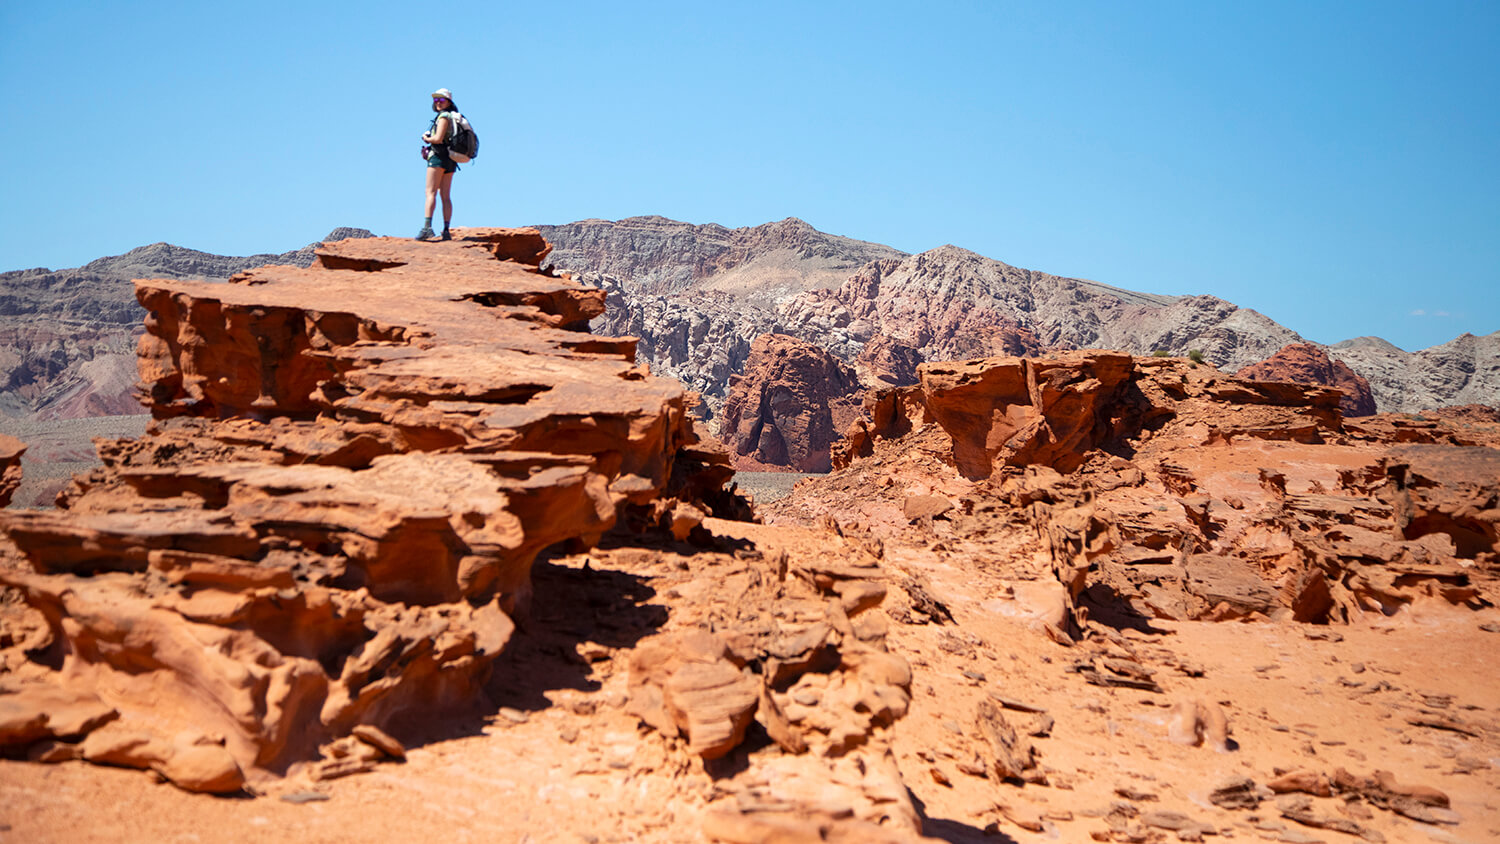 Gold Butte hike